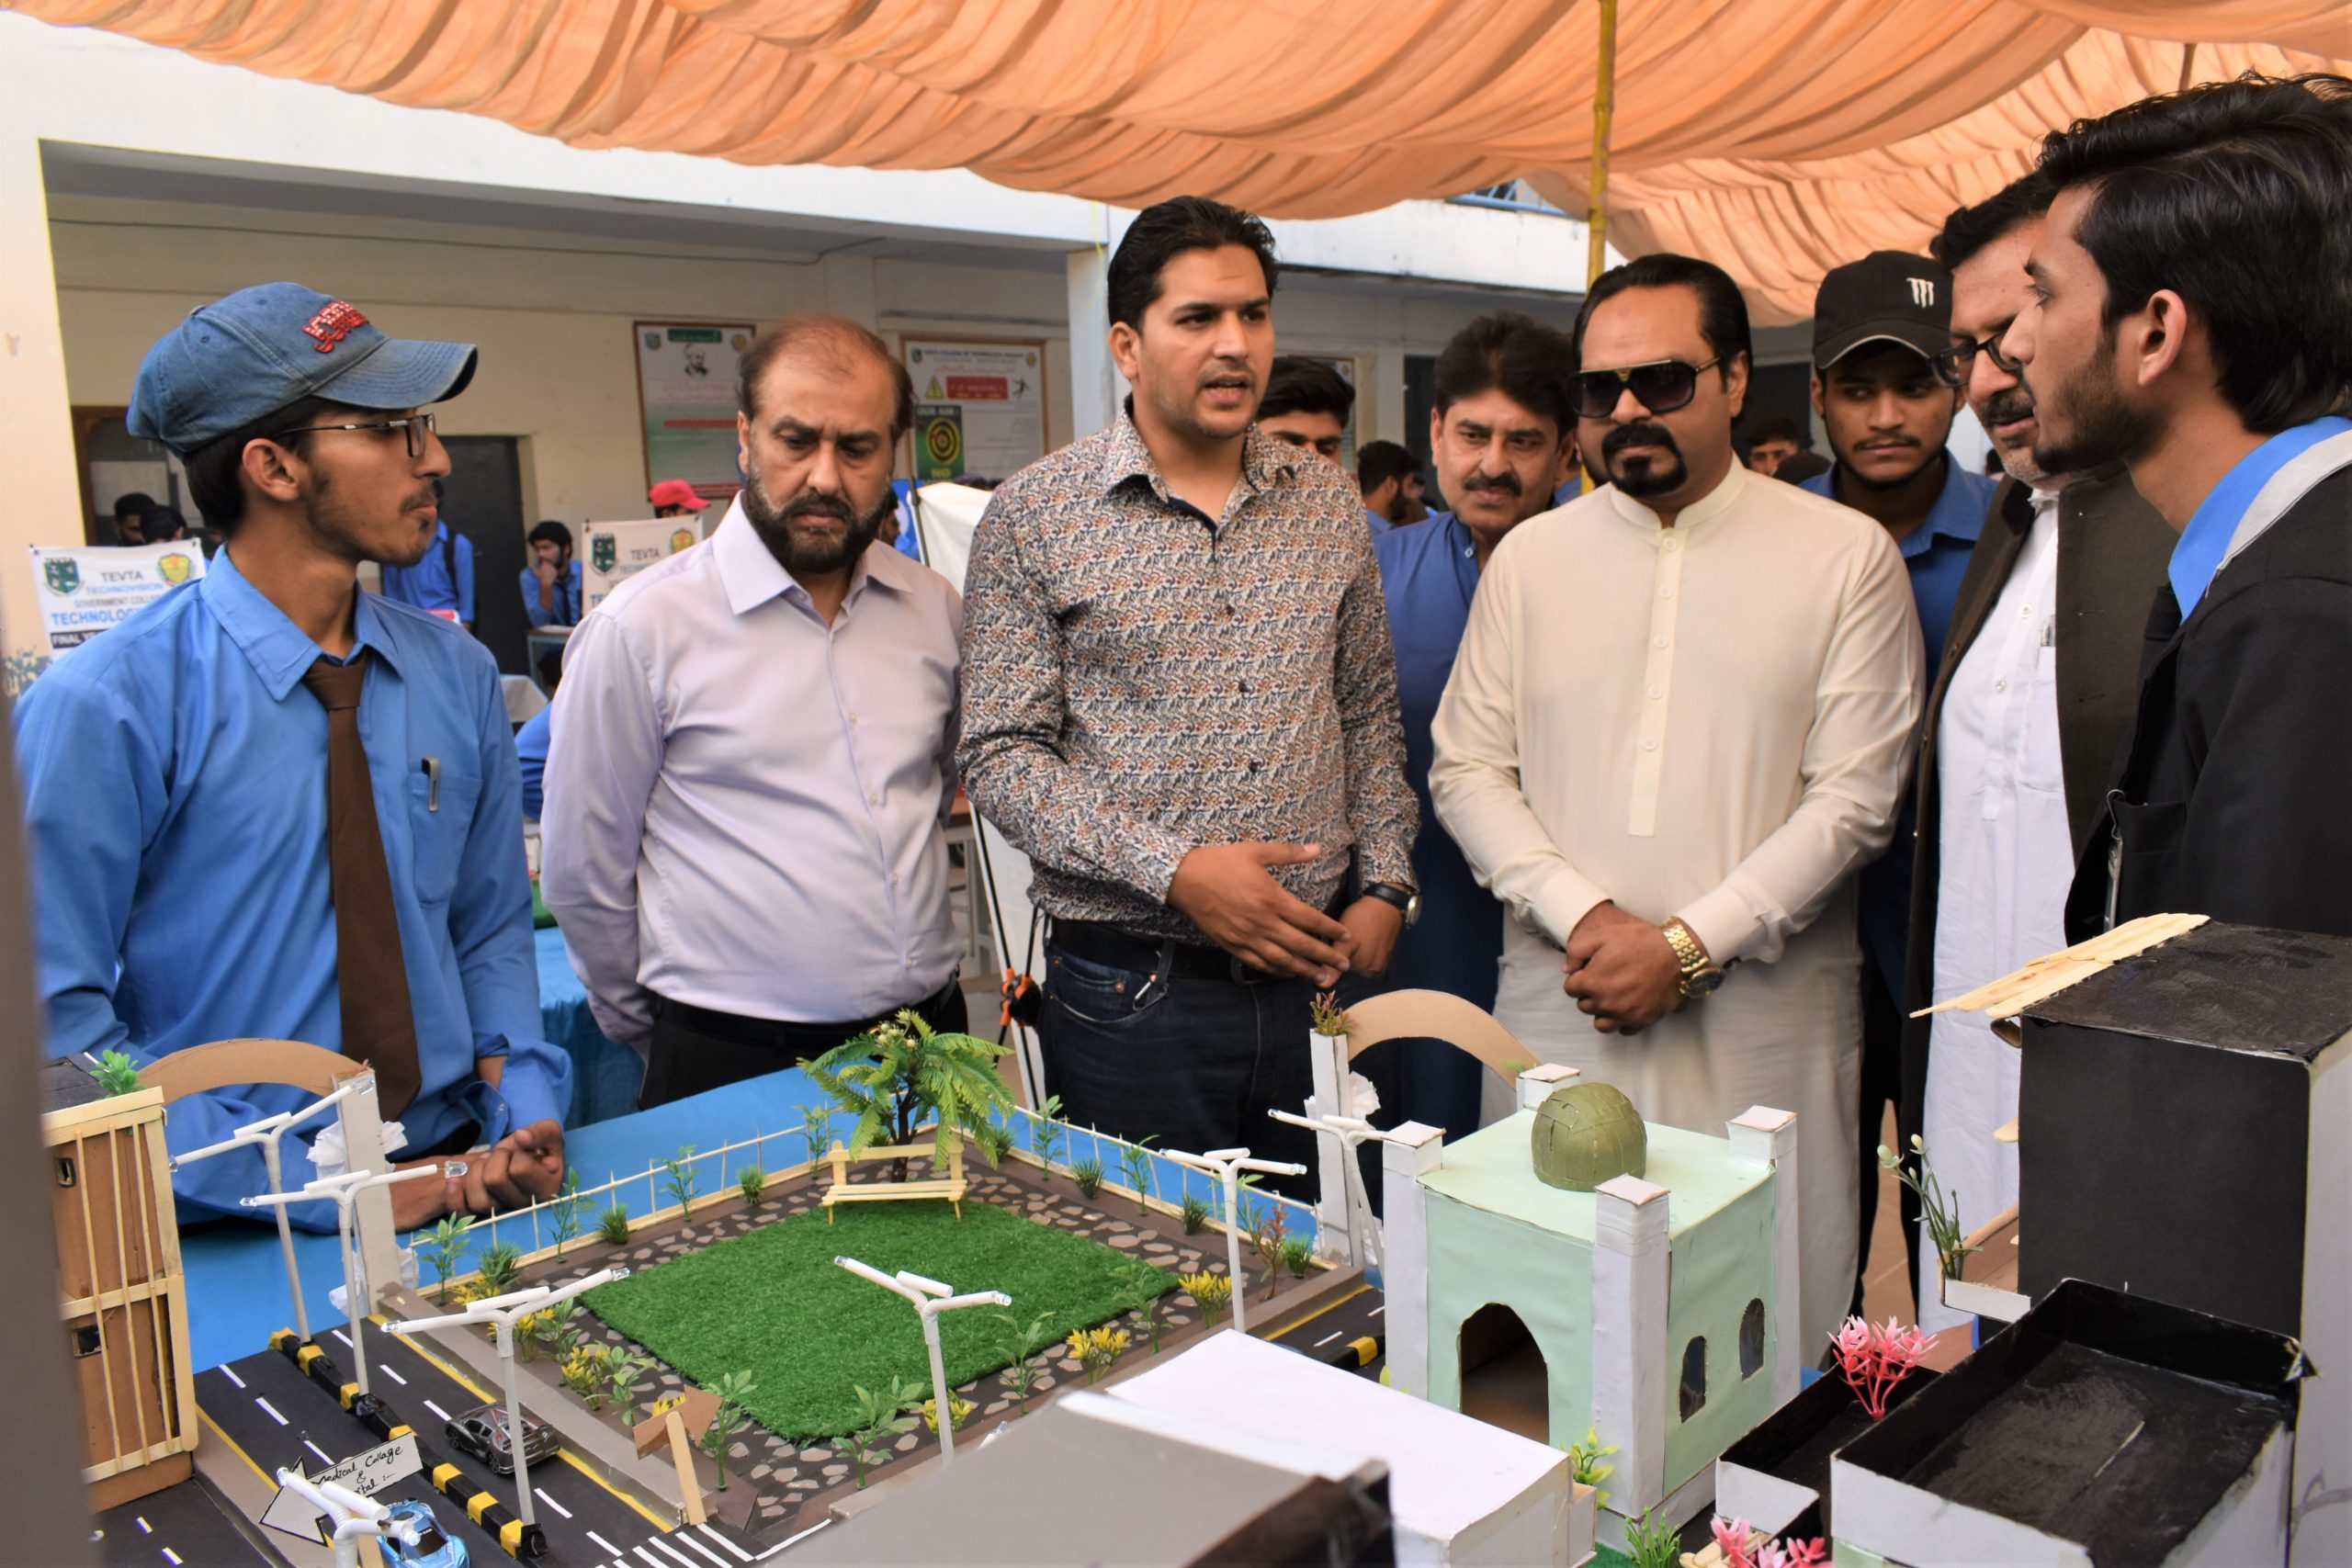 Mr. Muhammad Idrees, Executive Committee Member Sialkot Chamber of Commerce & Industry as Guest of Honor attended the “TEVTA Techno Vision Contest 2022” hosted by Government College of Technology Sialkot on April 2, 2022. Mr. Sheikh Sohail Zafar and Mr. Muhammad Shahbaz, Executive Committee Members SCCI also accompanied him during the visit.